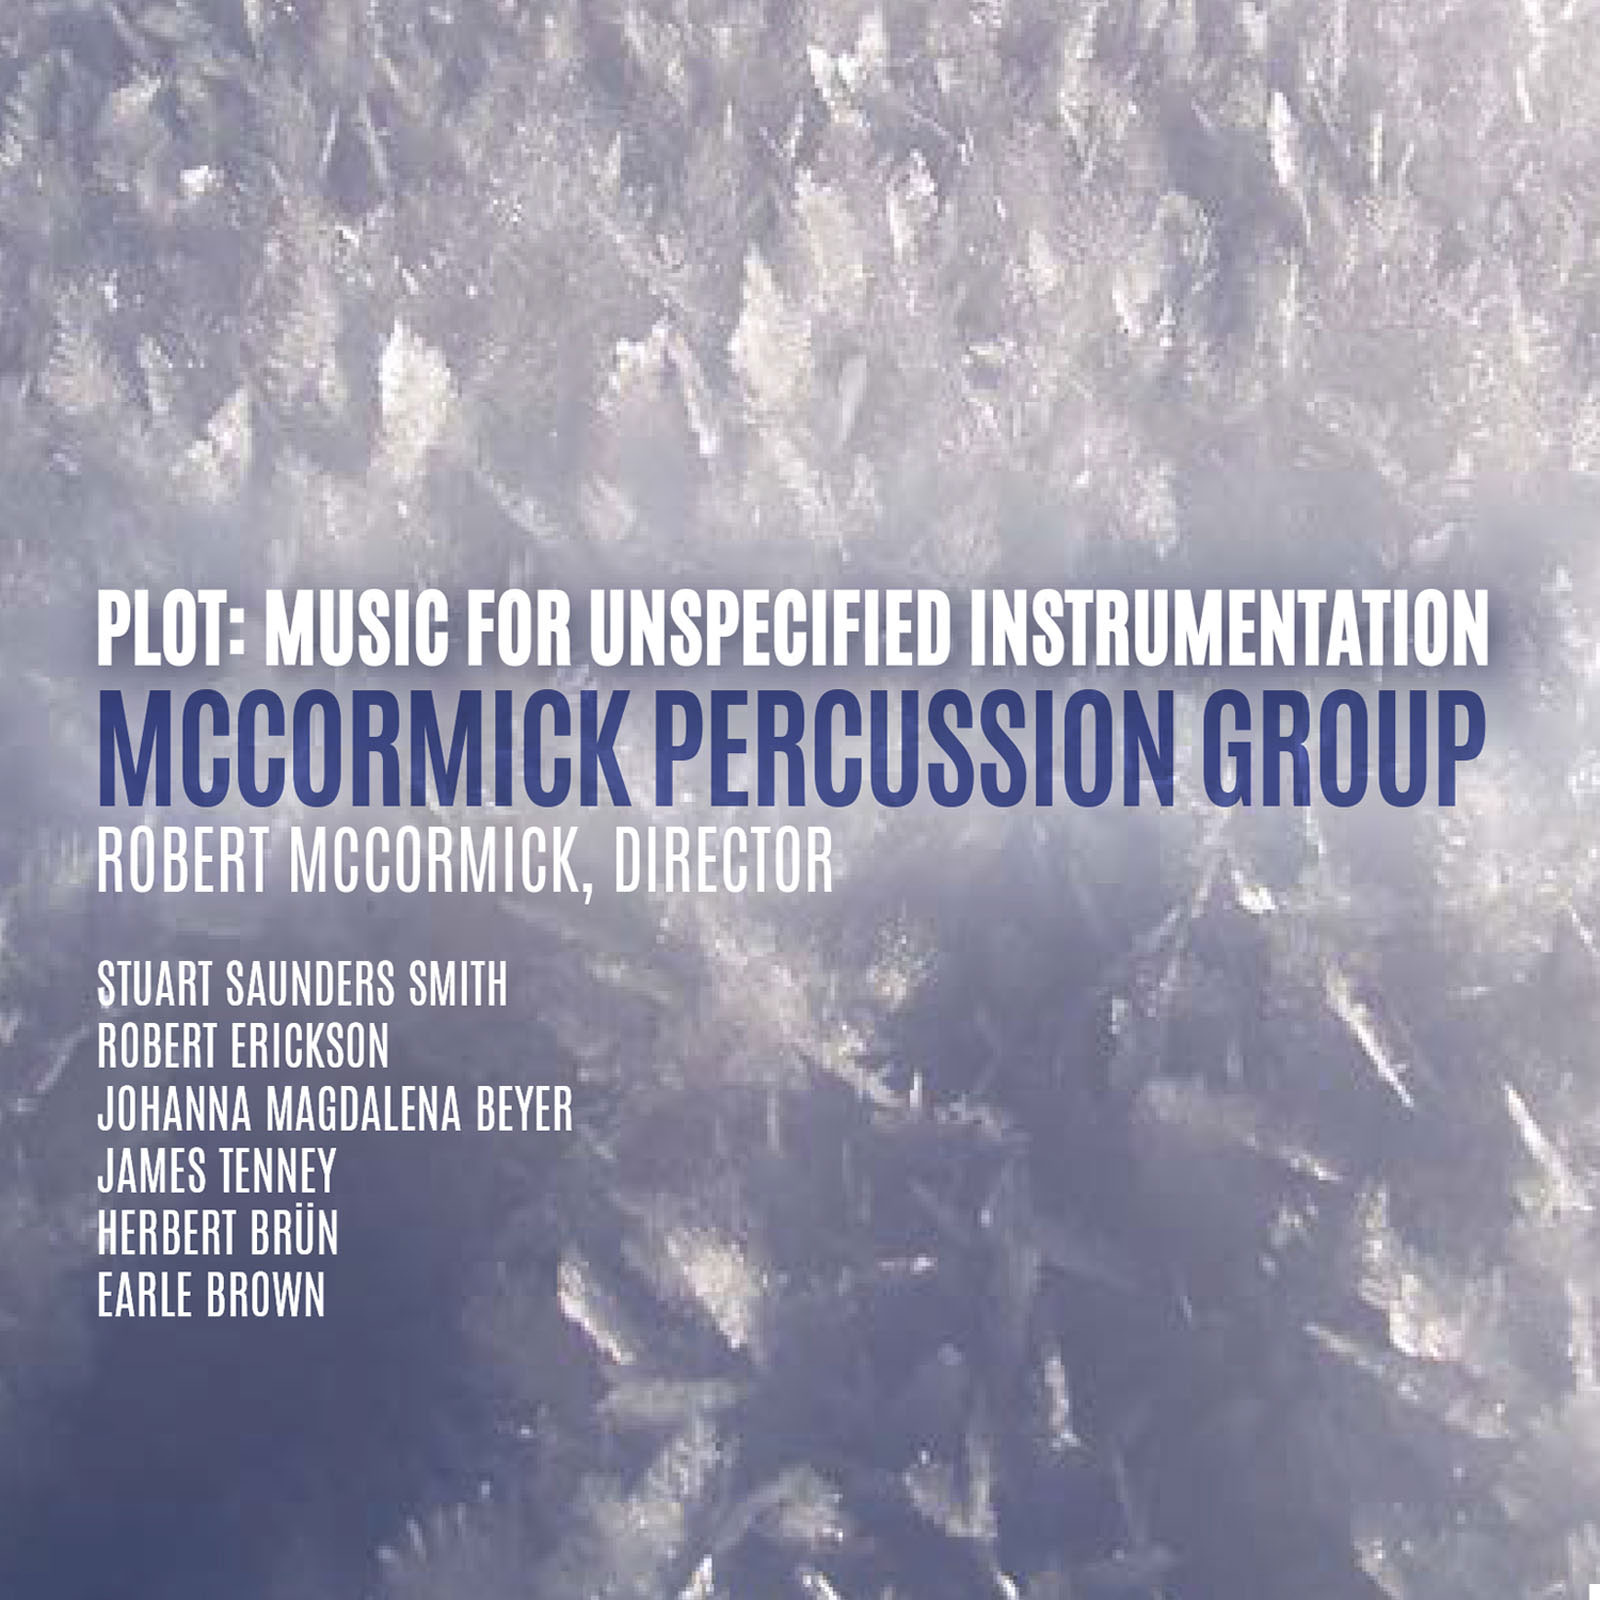 Plot: Music For Unspecified Instrumentation